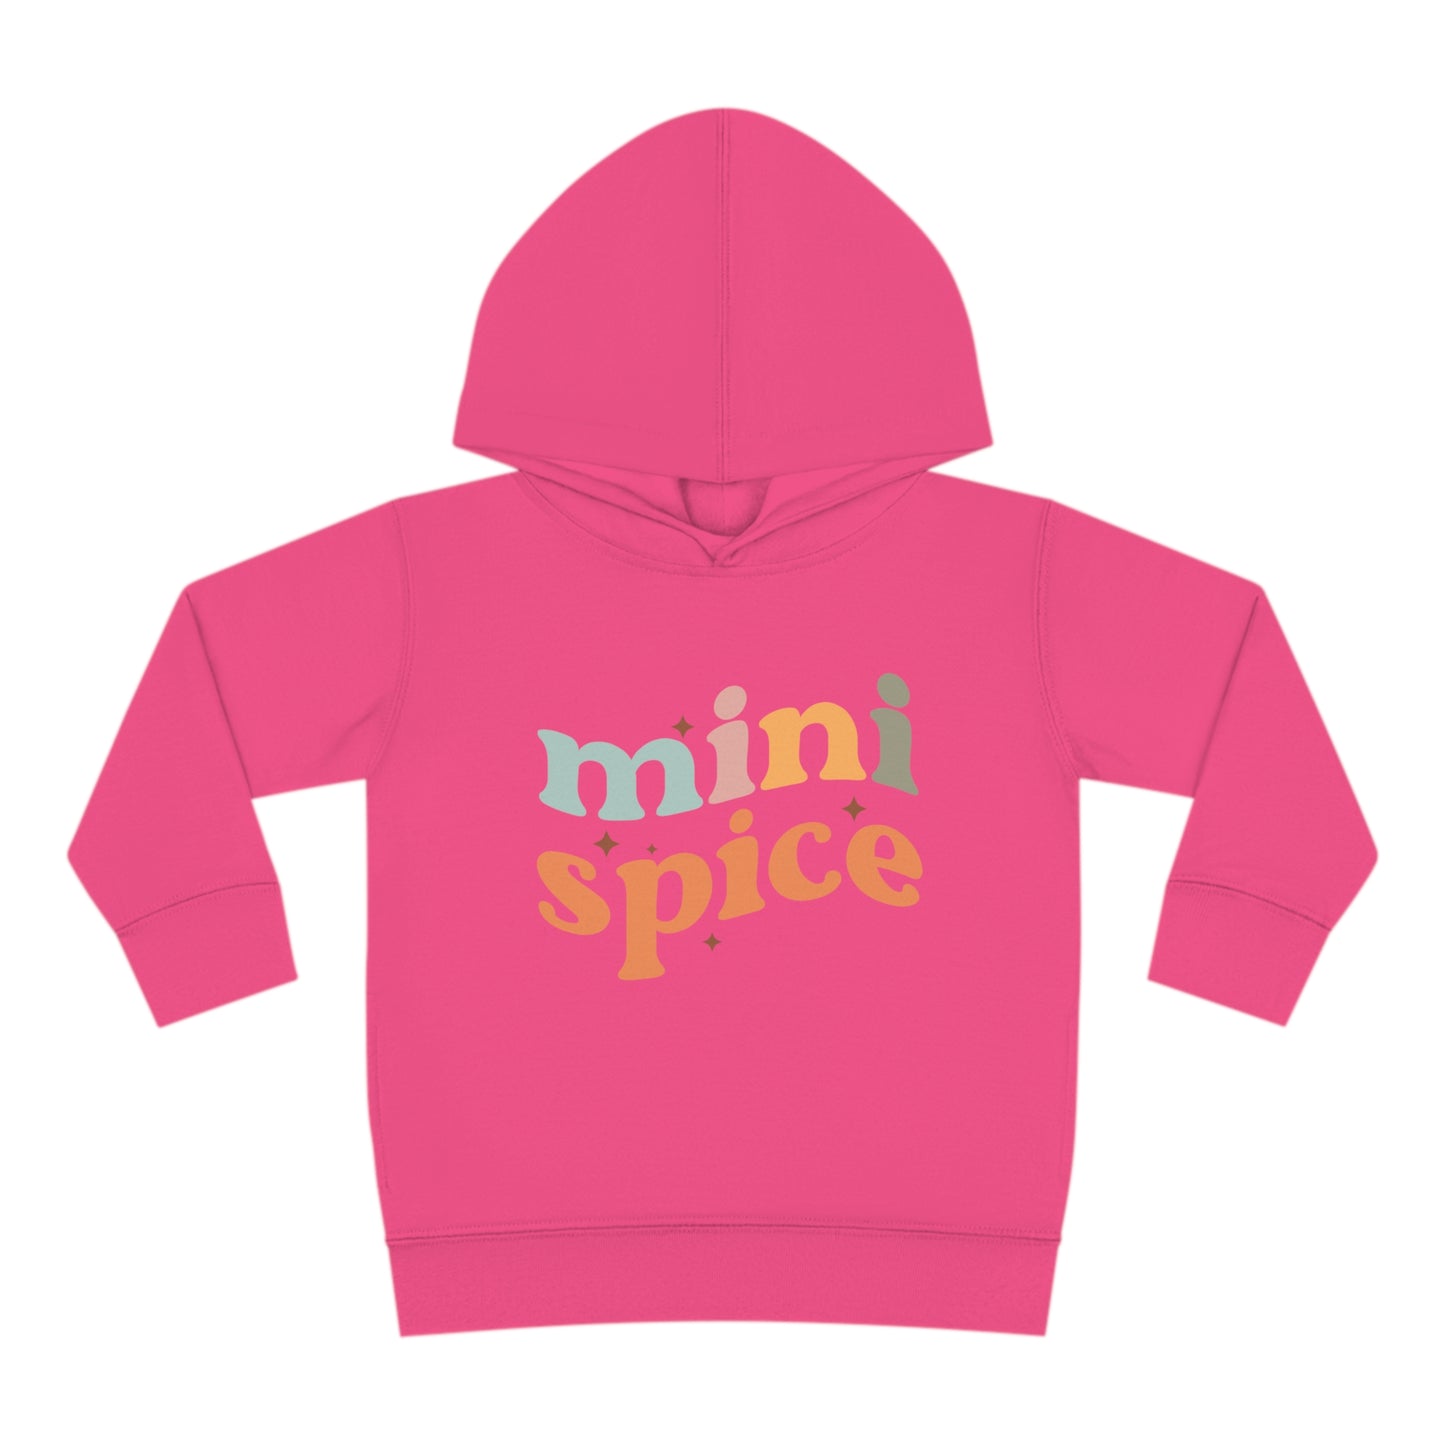 Style 3 Mini Spice Toddler Pullover Fleece Hoodie